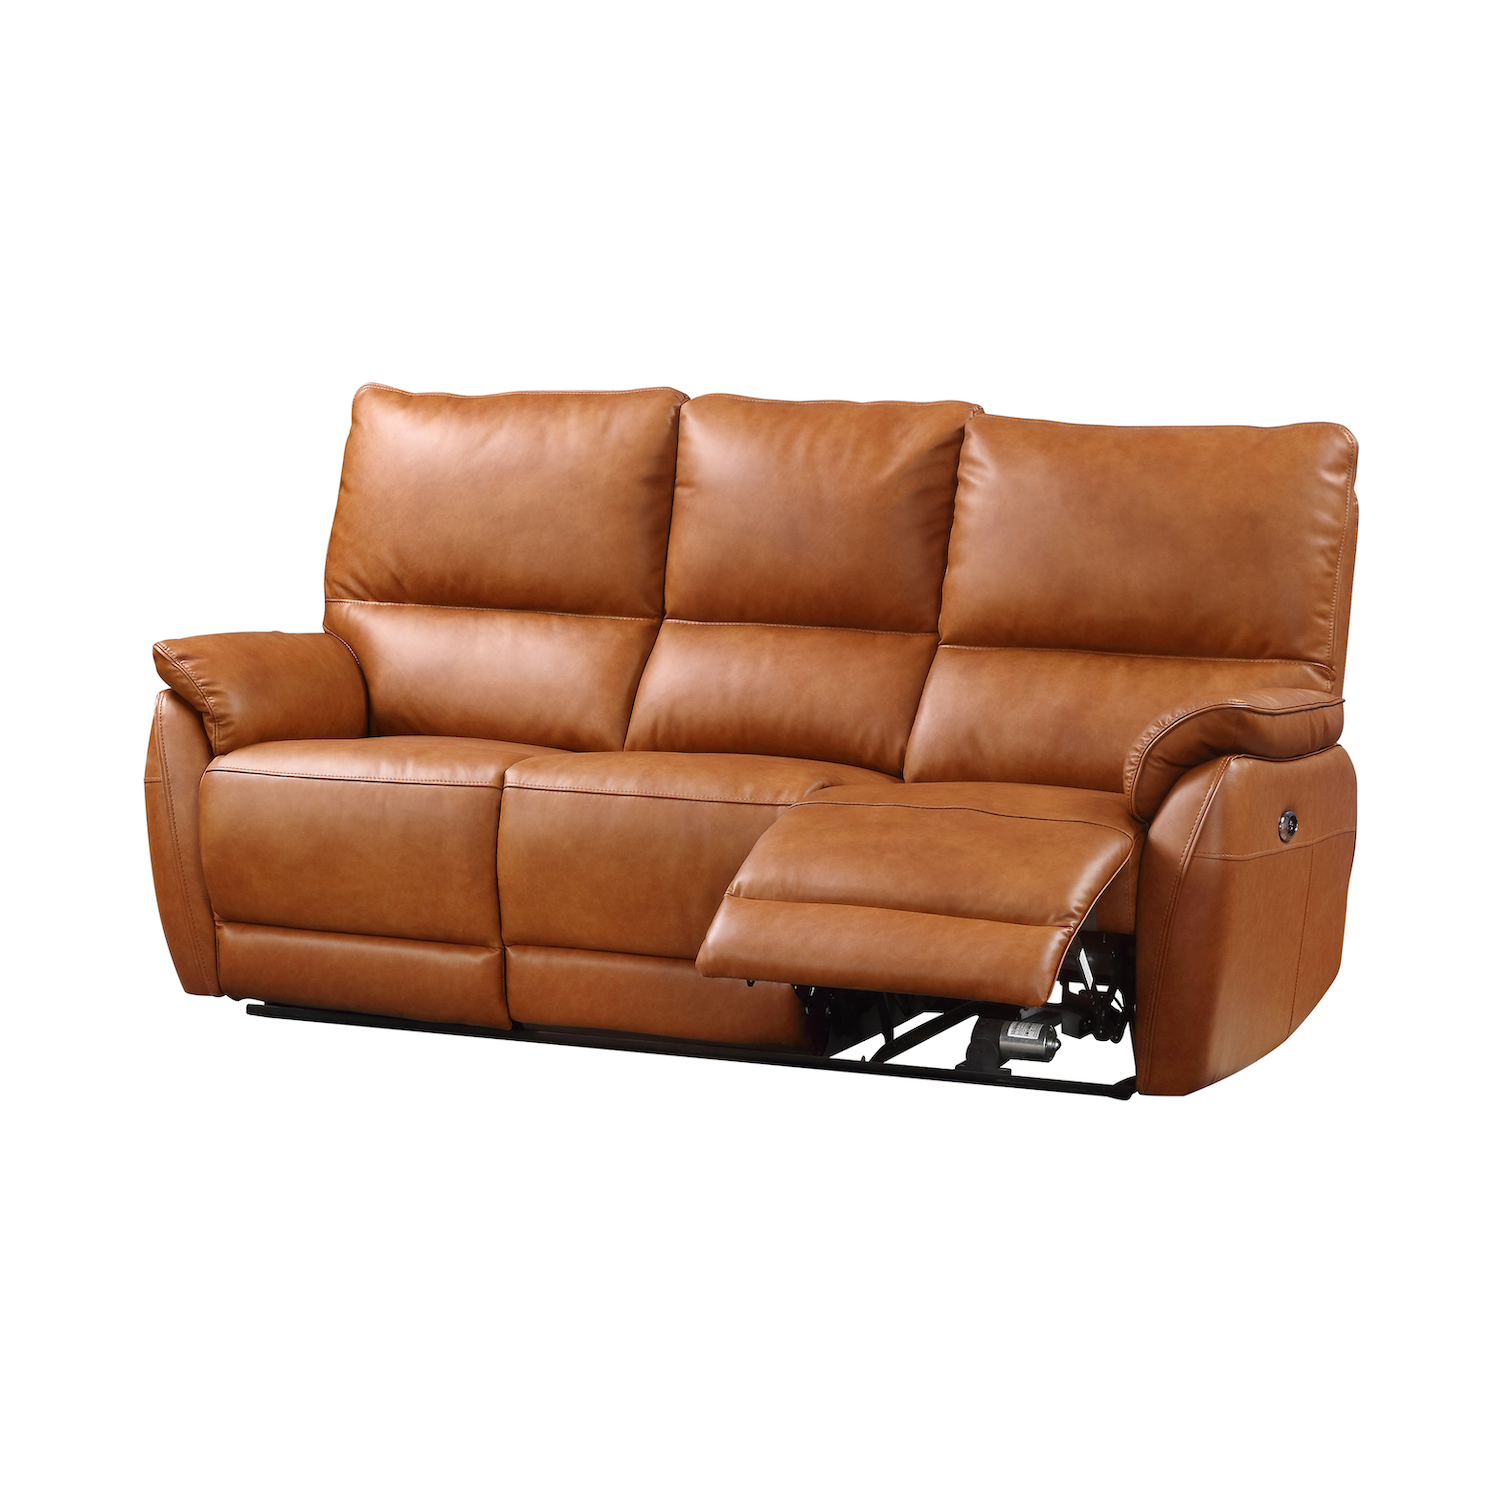 Esprit 3 Seater Power Recliner Tan Leather